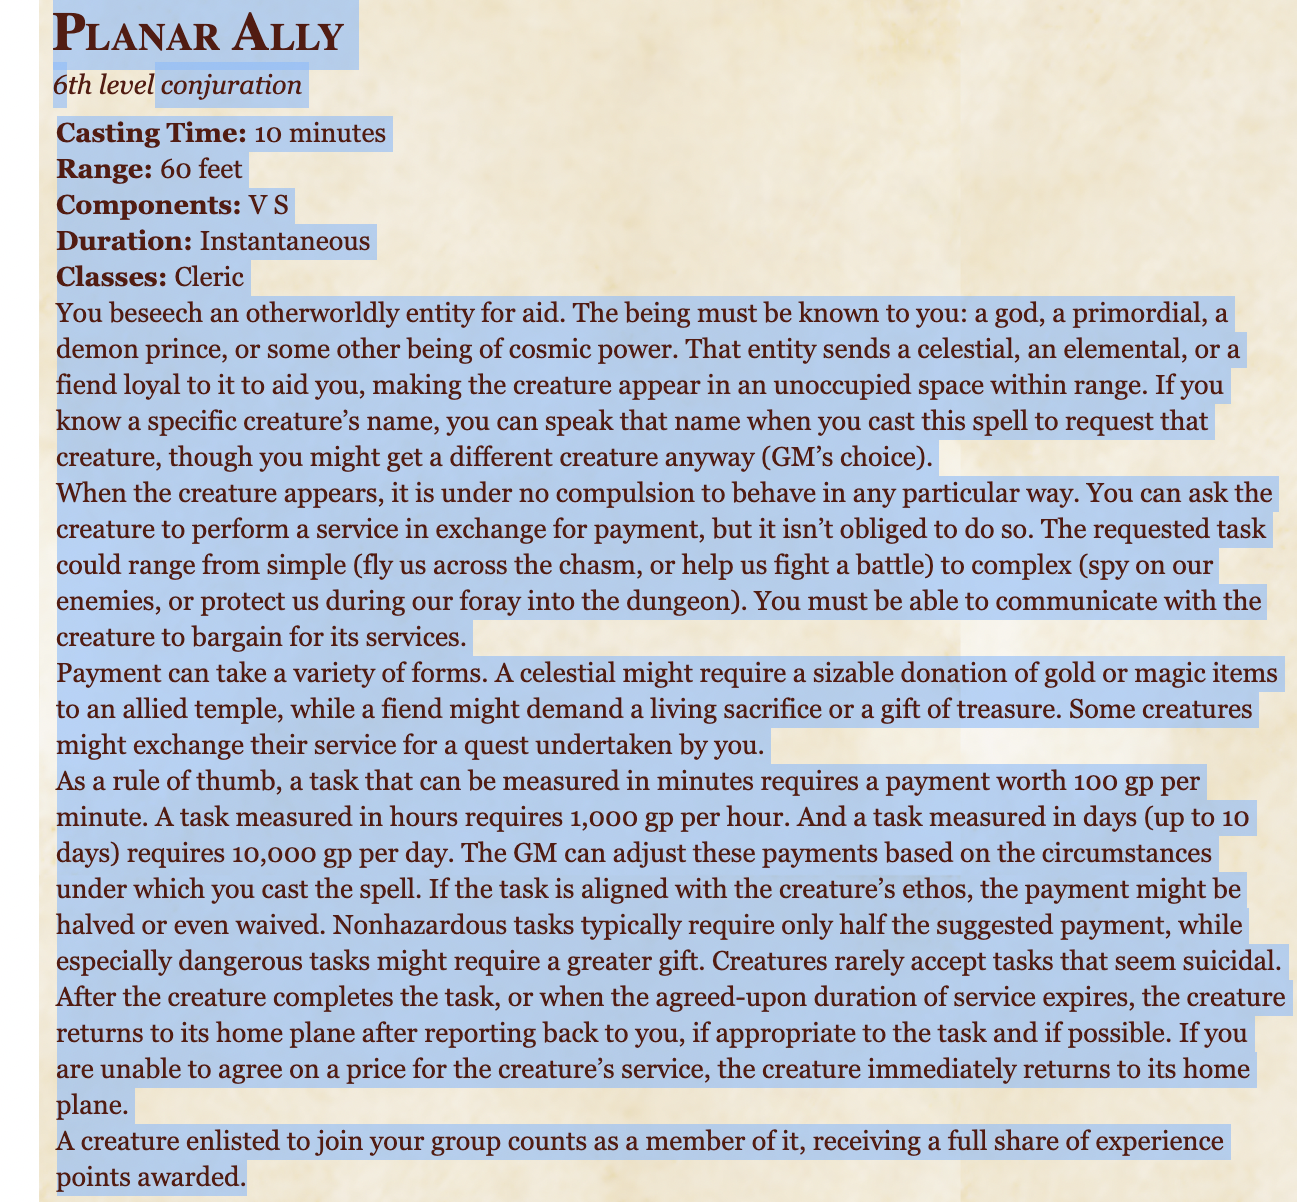 Planar Ally 5e (5th Edition) Spell in D&D